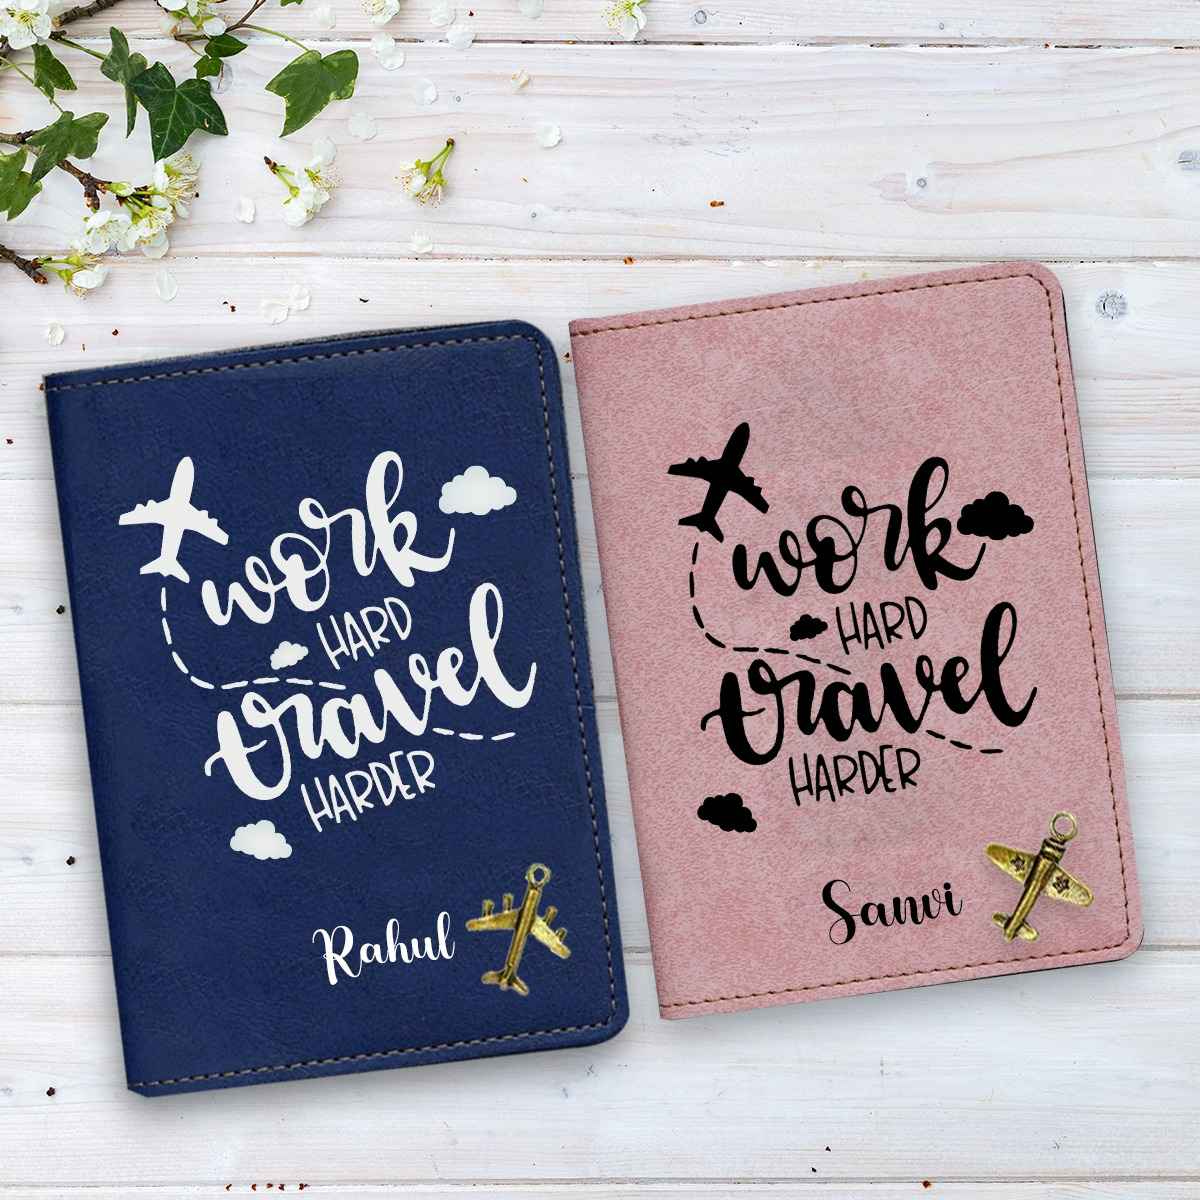 Customized printed passport covers with charms - HoMafy